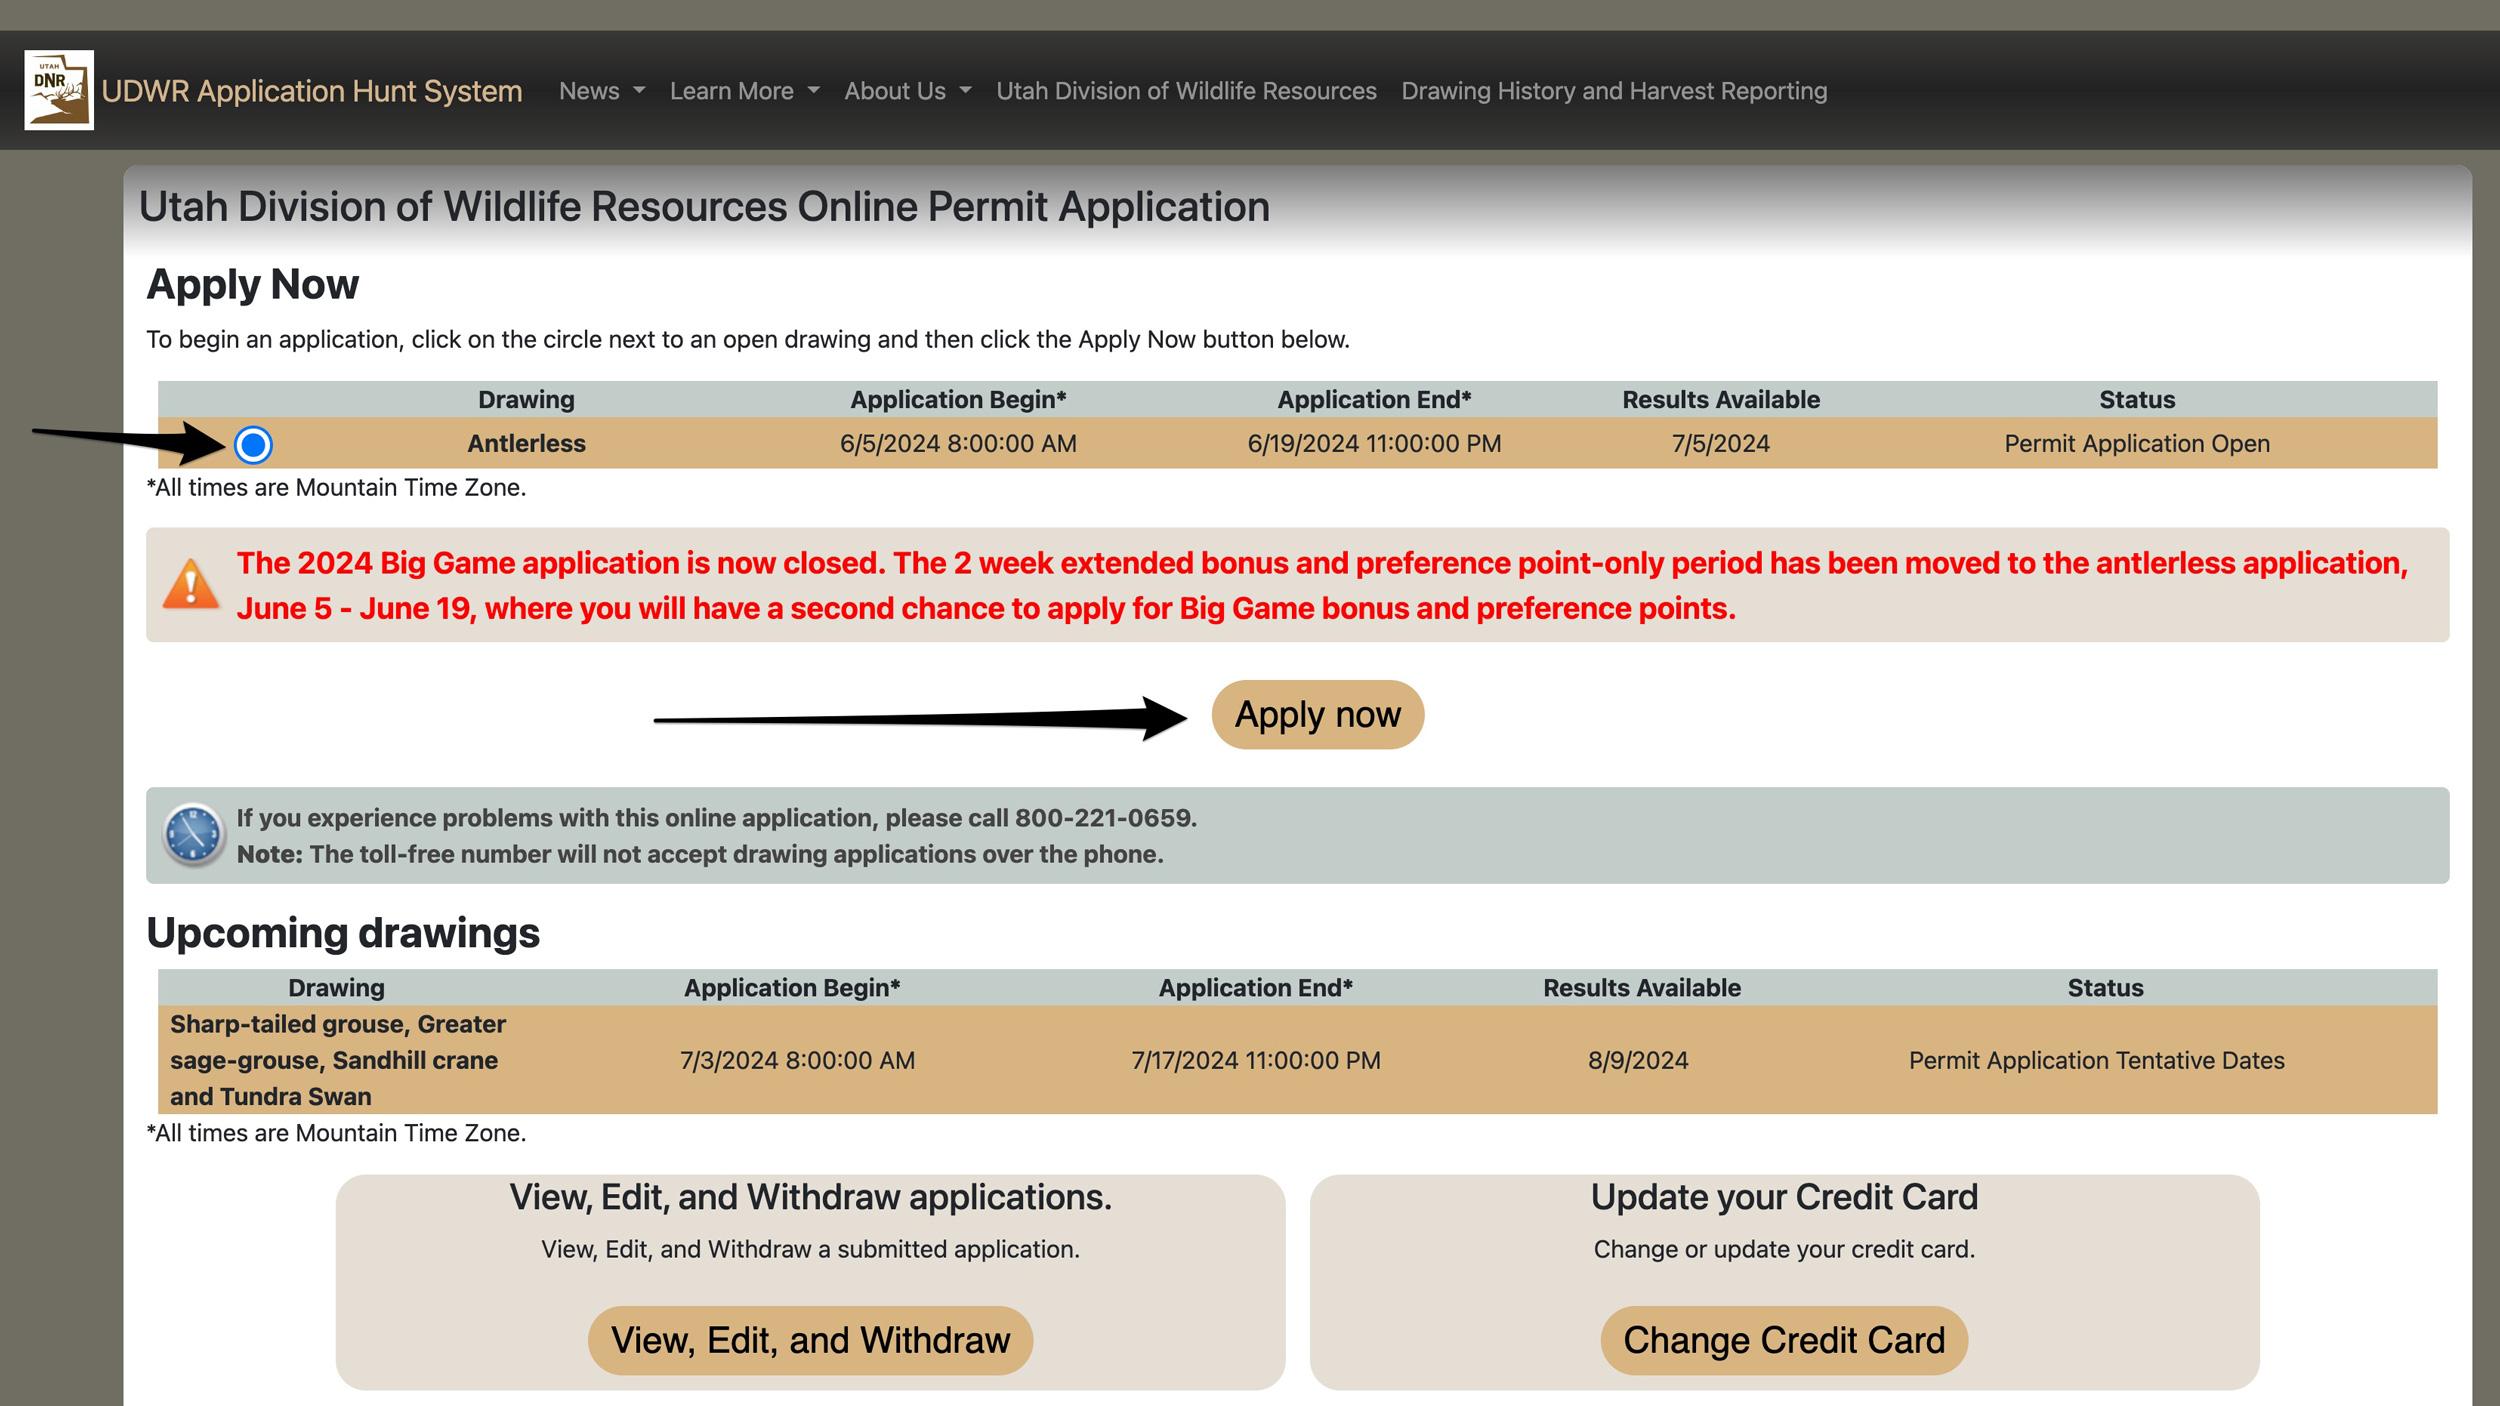 Utah online hunting permit application page for purchasing bonus and preference points